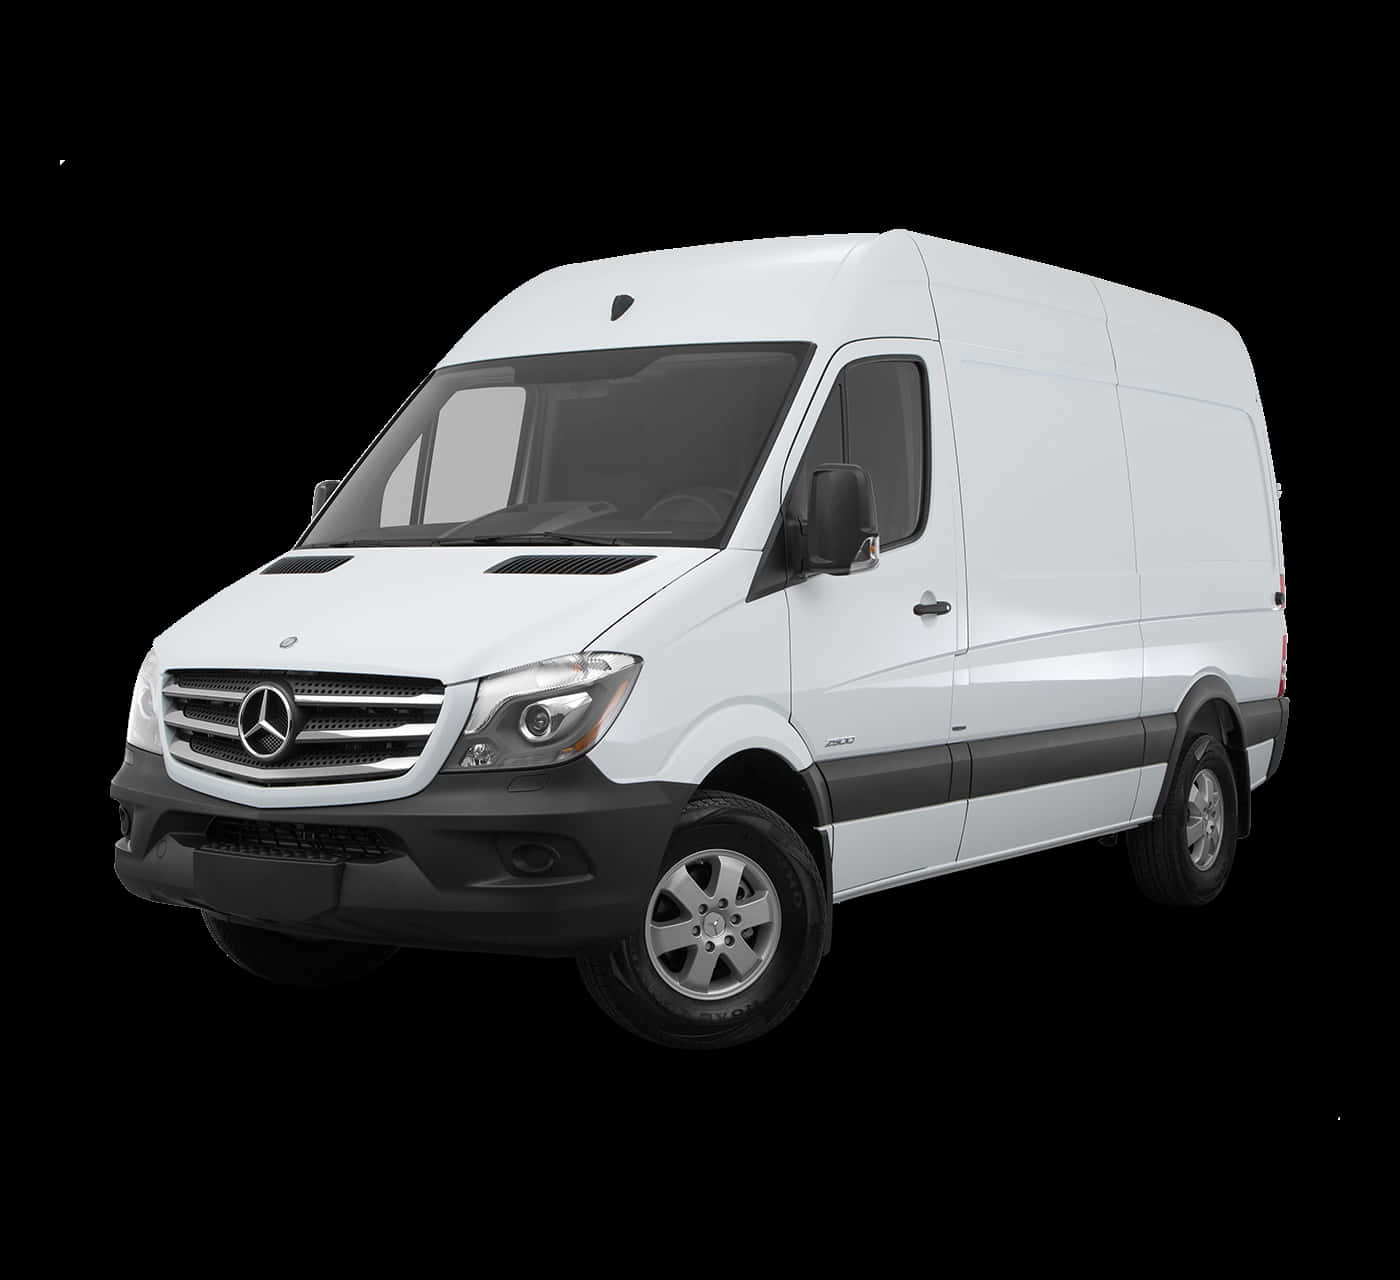 Sleek and Spacious Mercedes Benz Sprinter on the Road Wallpaper